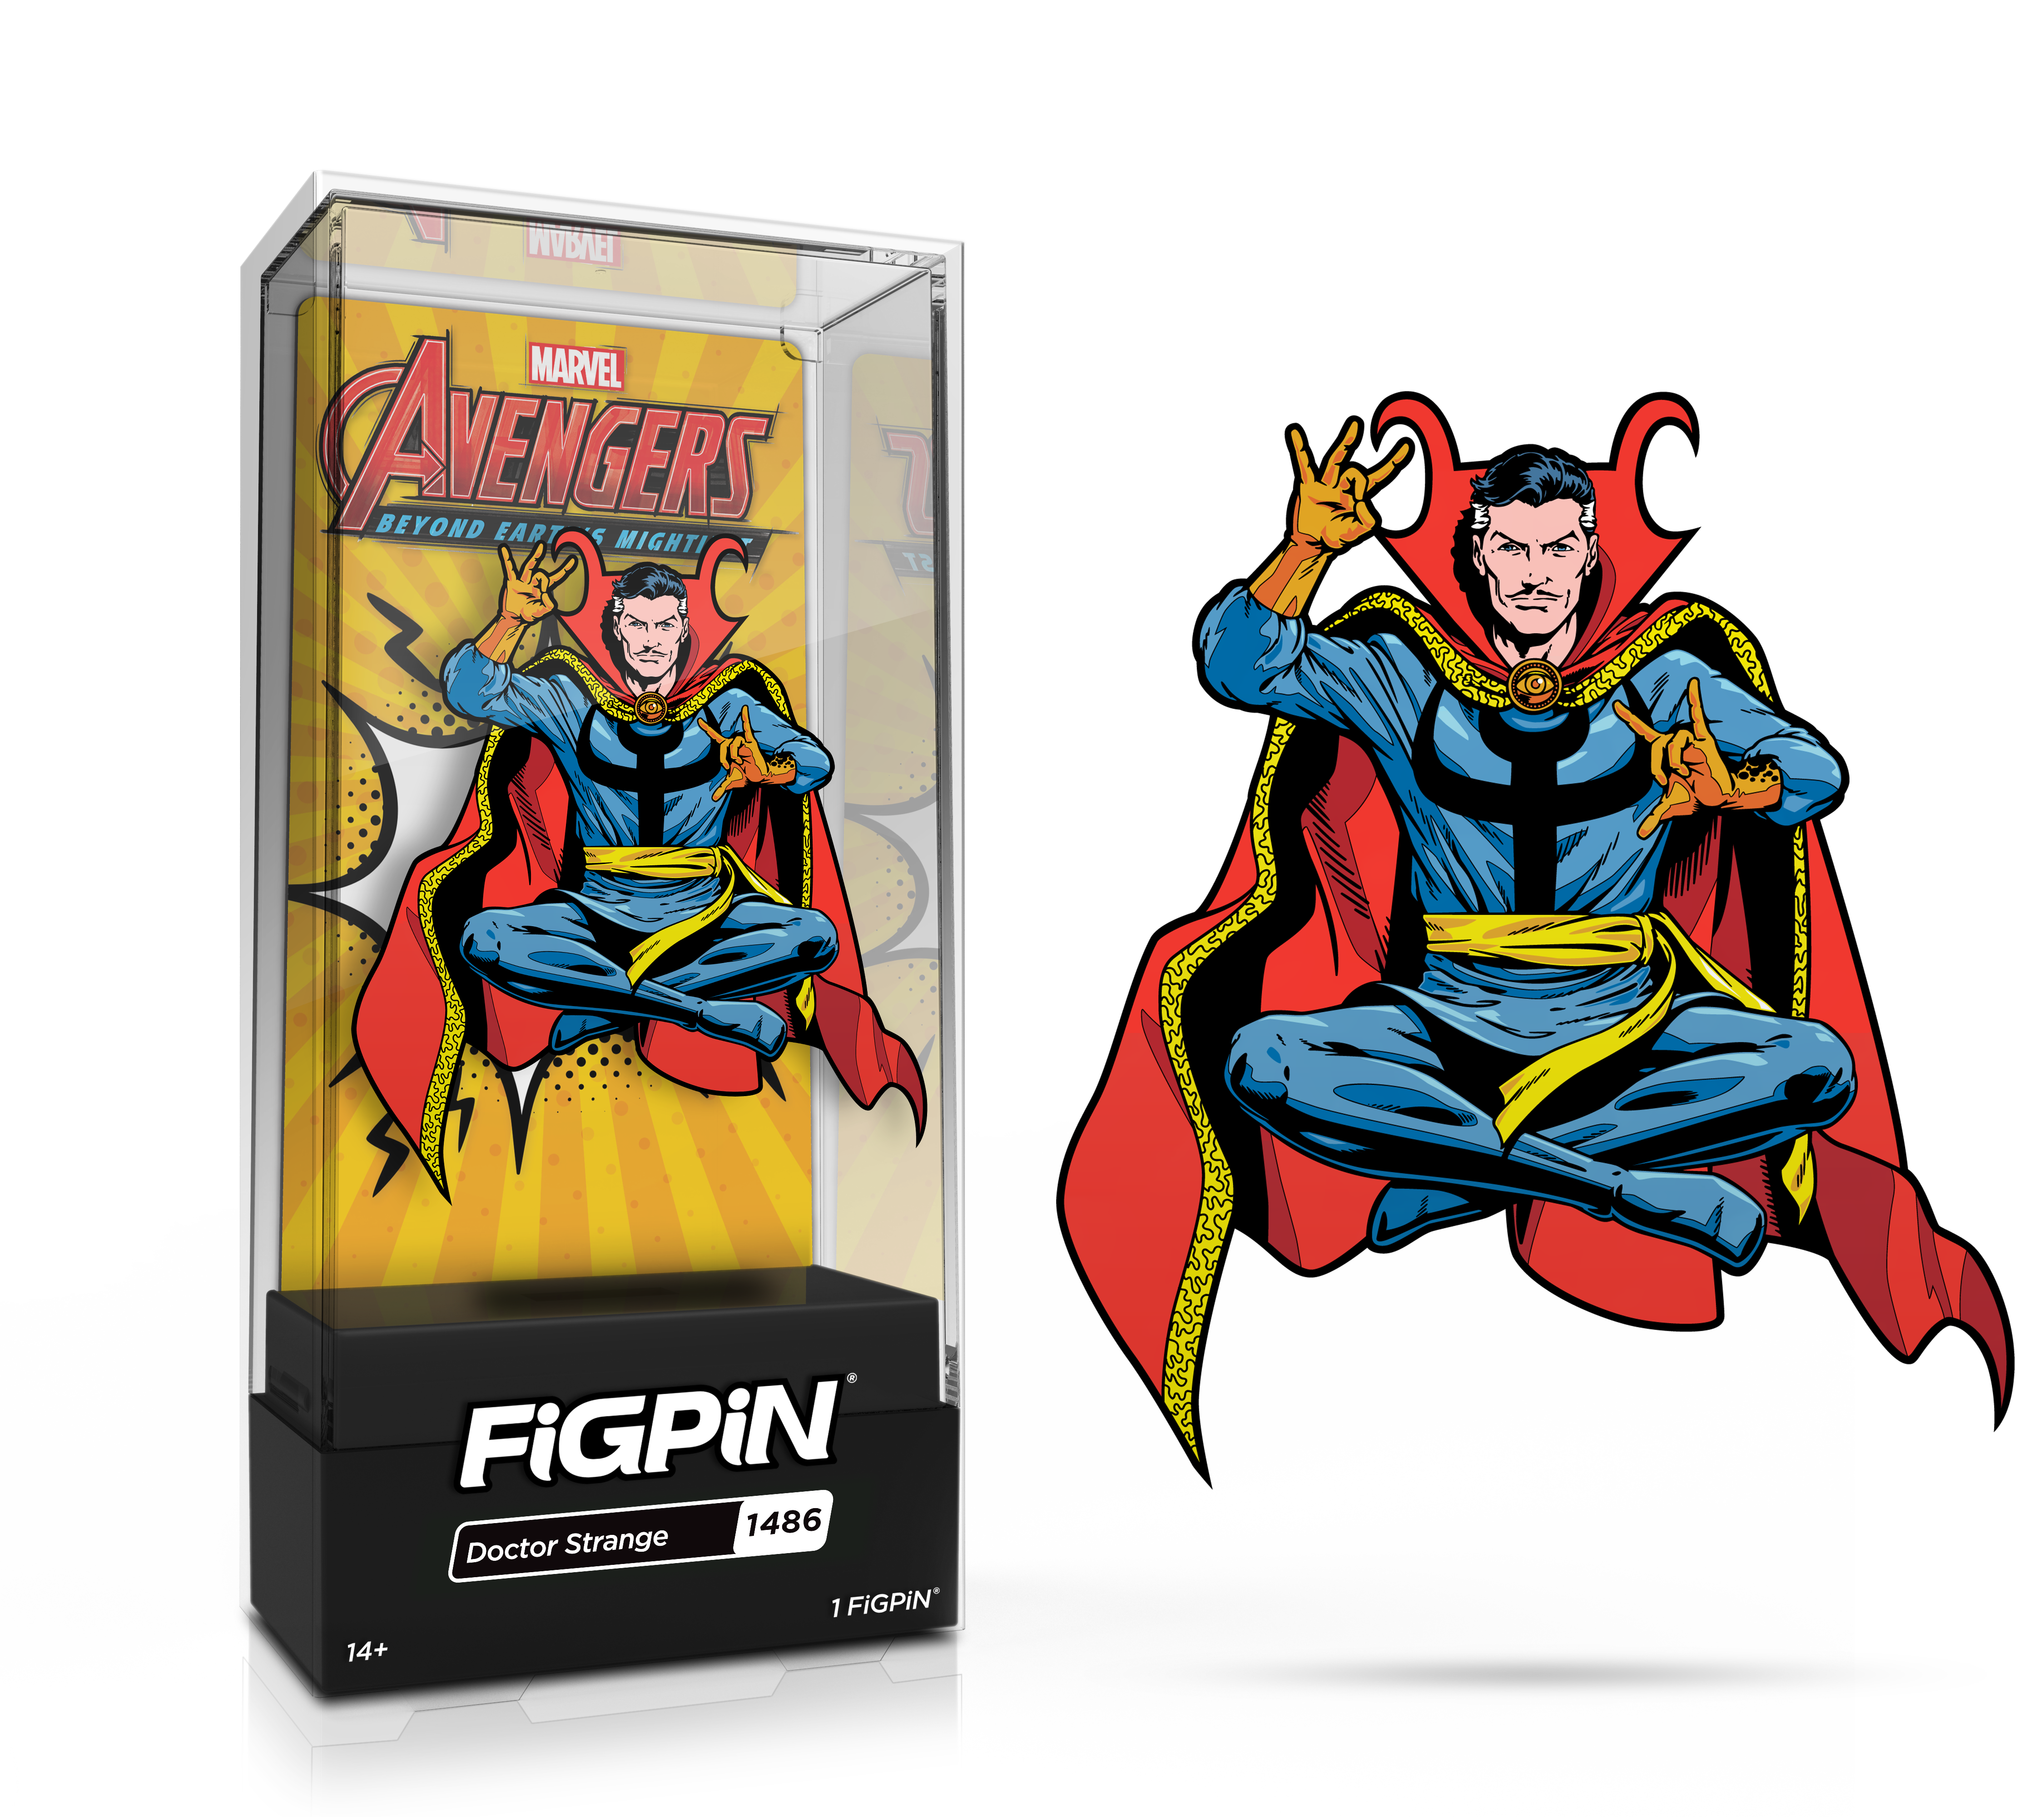 Side by side view of the Doctor Strange enamel pin in display case and the art render.